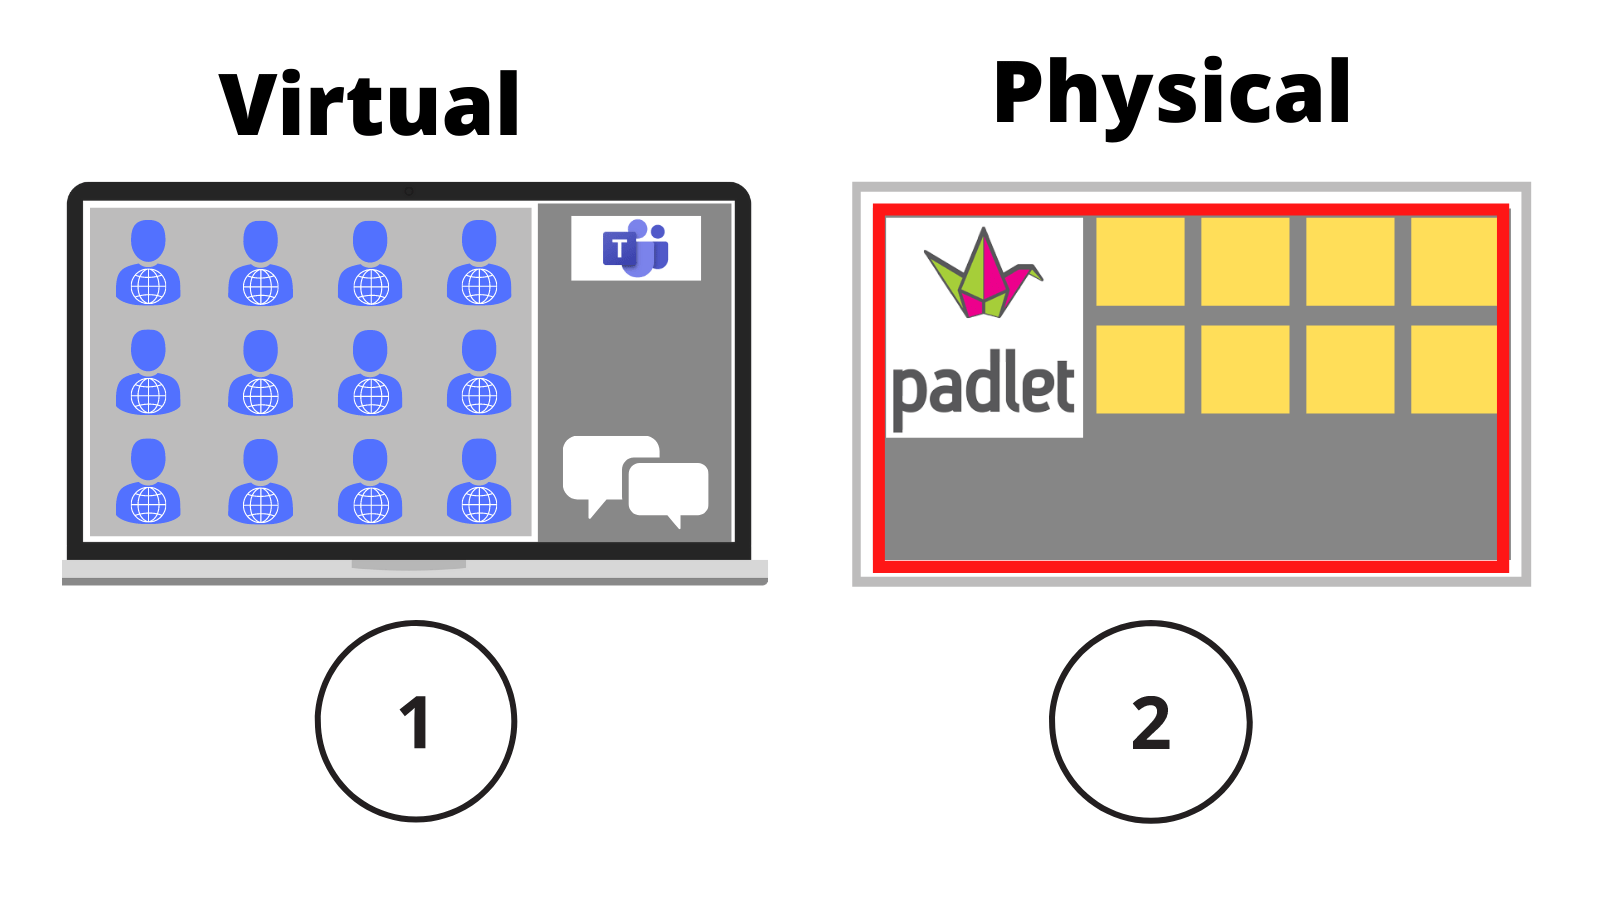 Two screens; one labelled '1, virtual' showing virtual participants the other labelled '2, physical' showing a padlet screen